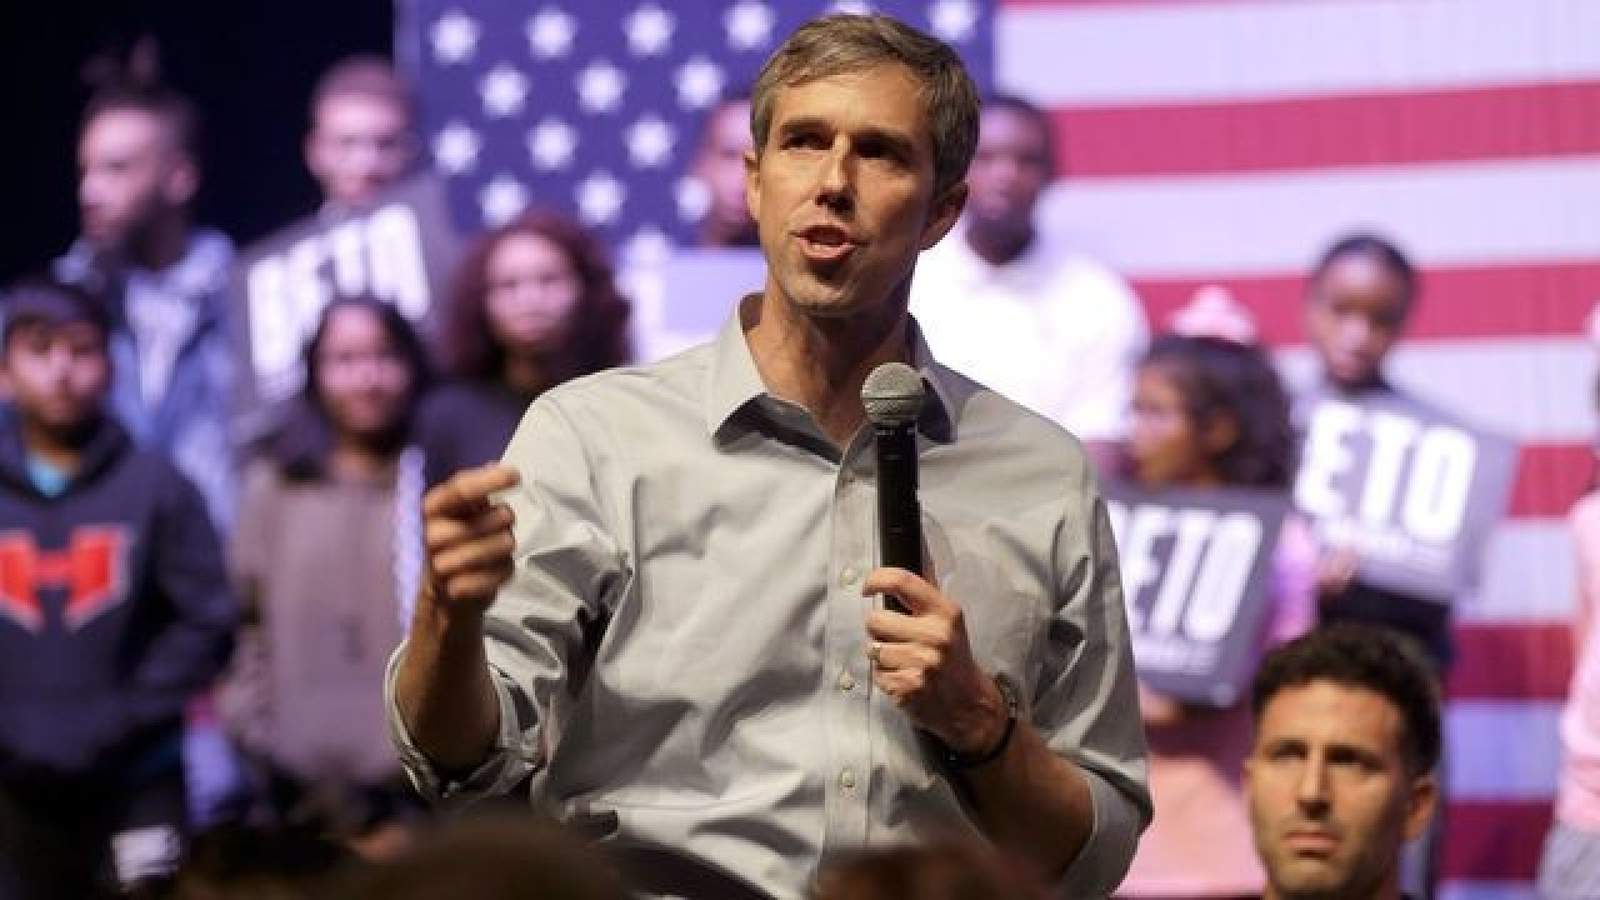 Records detail hiring of Beto O’Rourke by Texas State, including salary, resume and his future plans